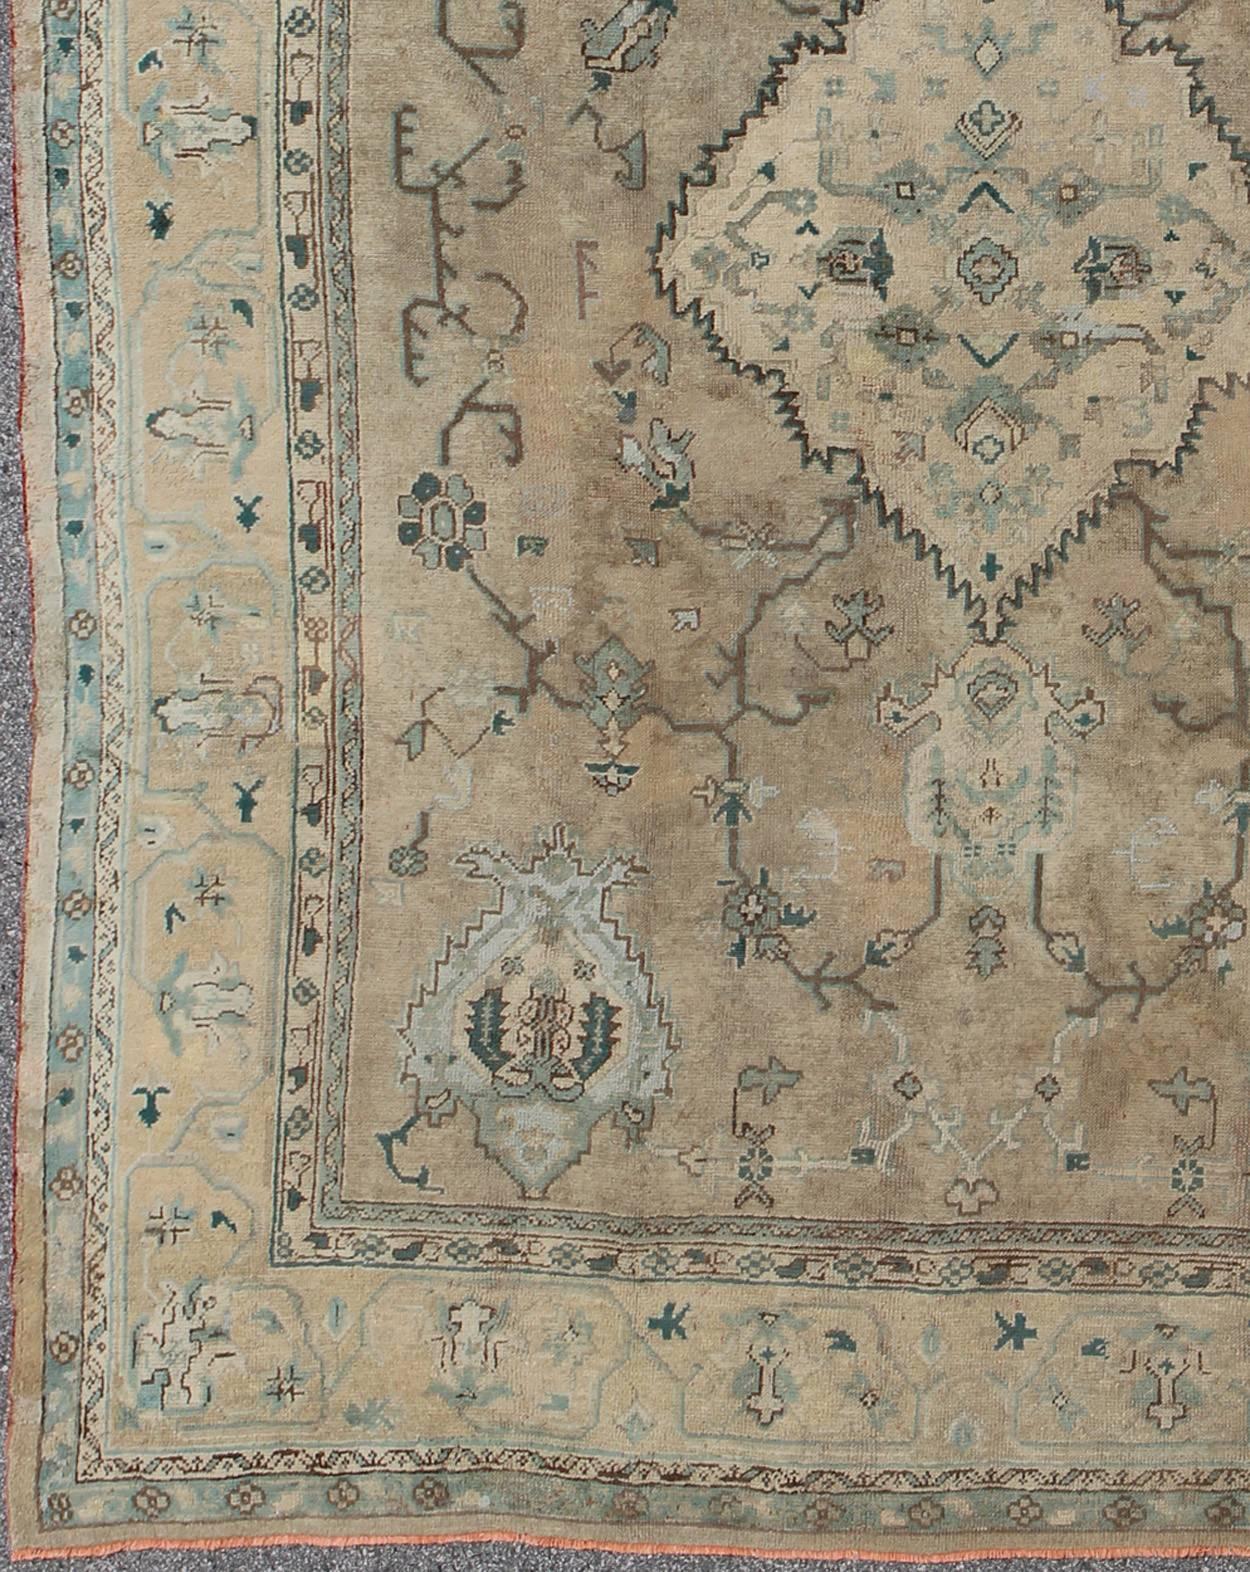 Neutral antique Oushak carpet in shades of teal, green, khaki, taupe and butter yellow. Keivan Woven Arts /  kwarugs /rug na-54747, country of origin / type: Turkey / Oushak, circa Early-20th century
Measures: 11'4 x 14'3.
This softly muted turn of